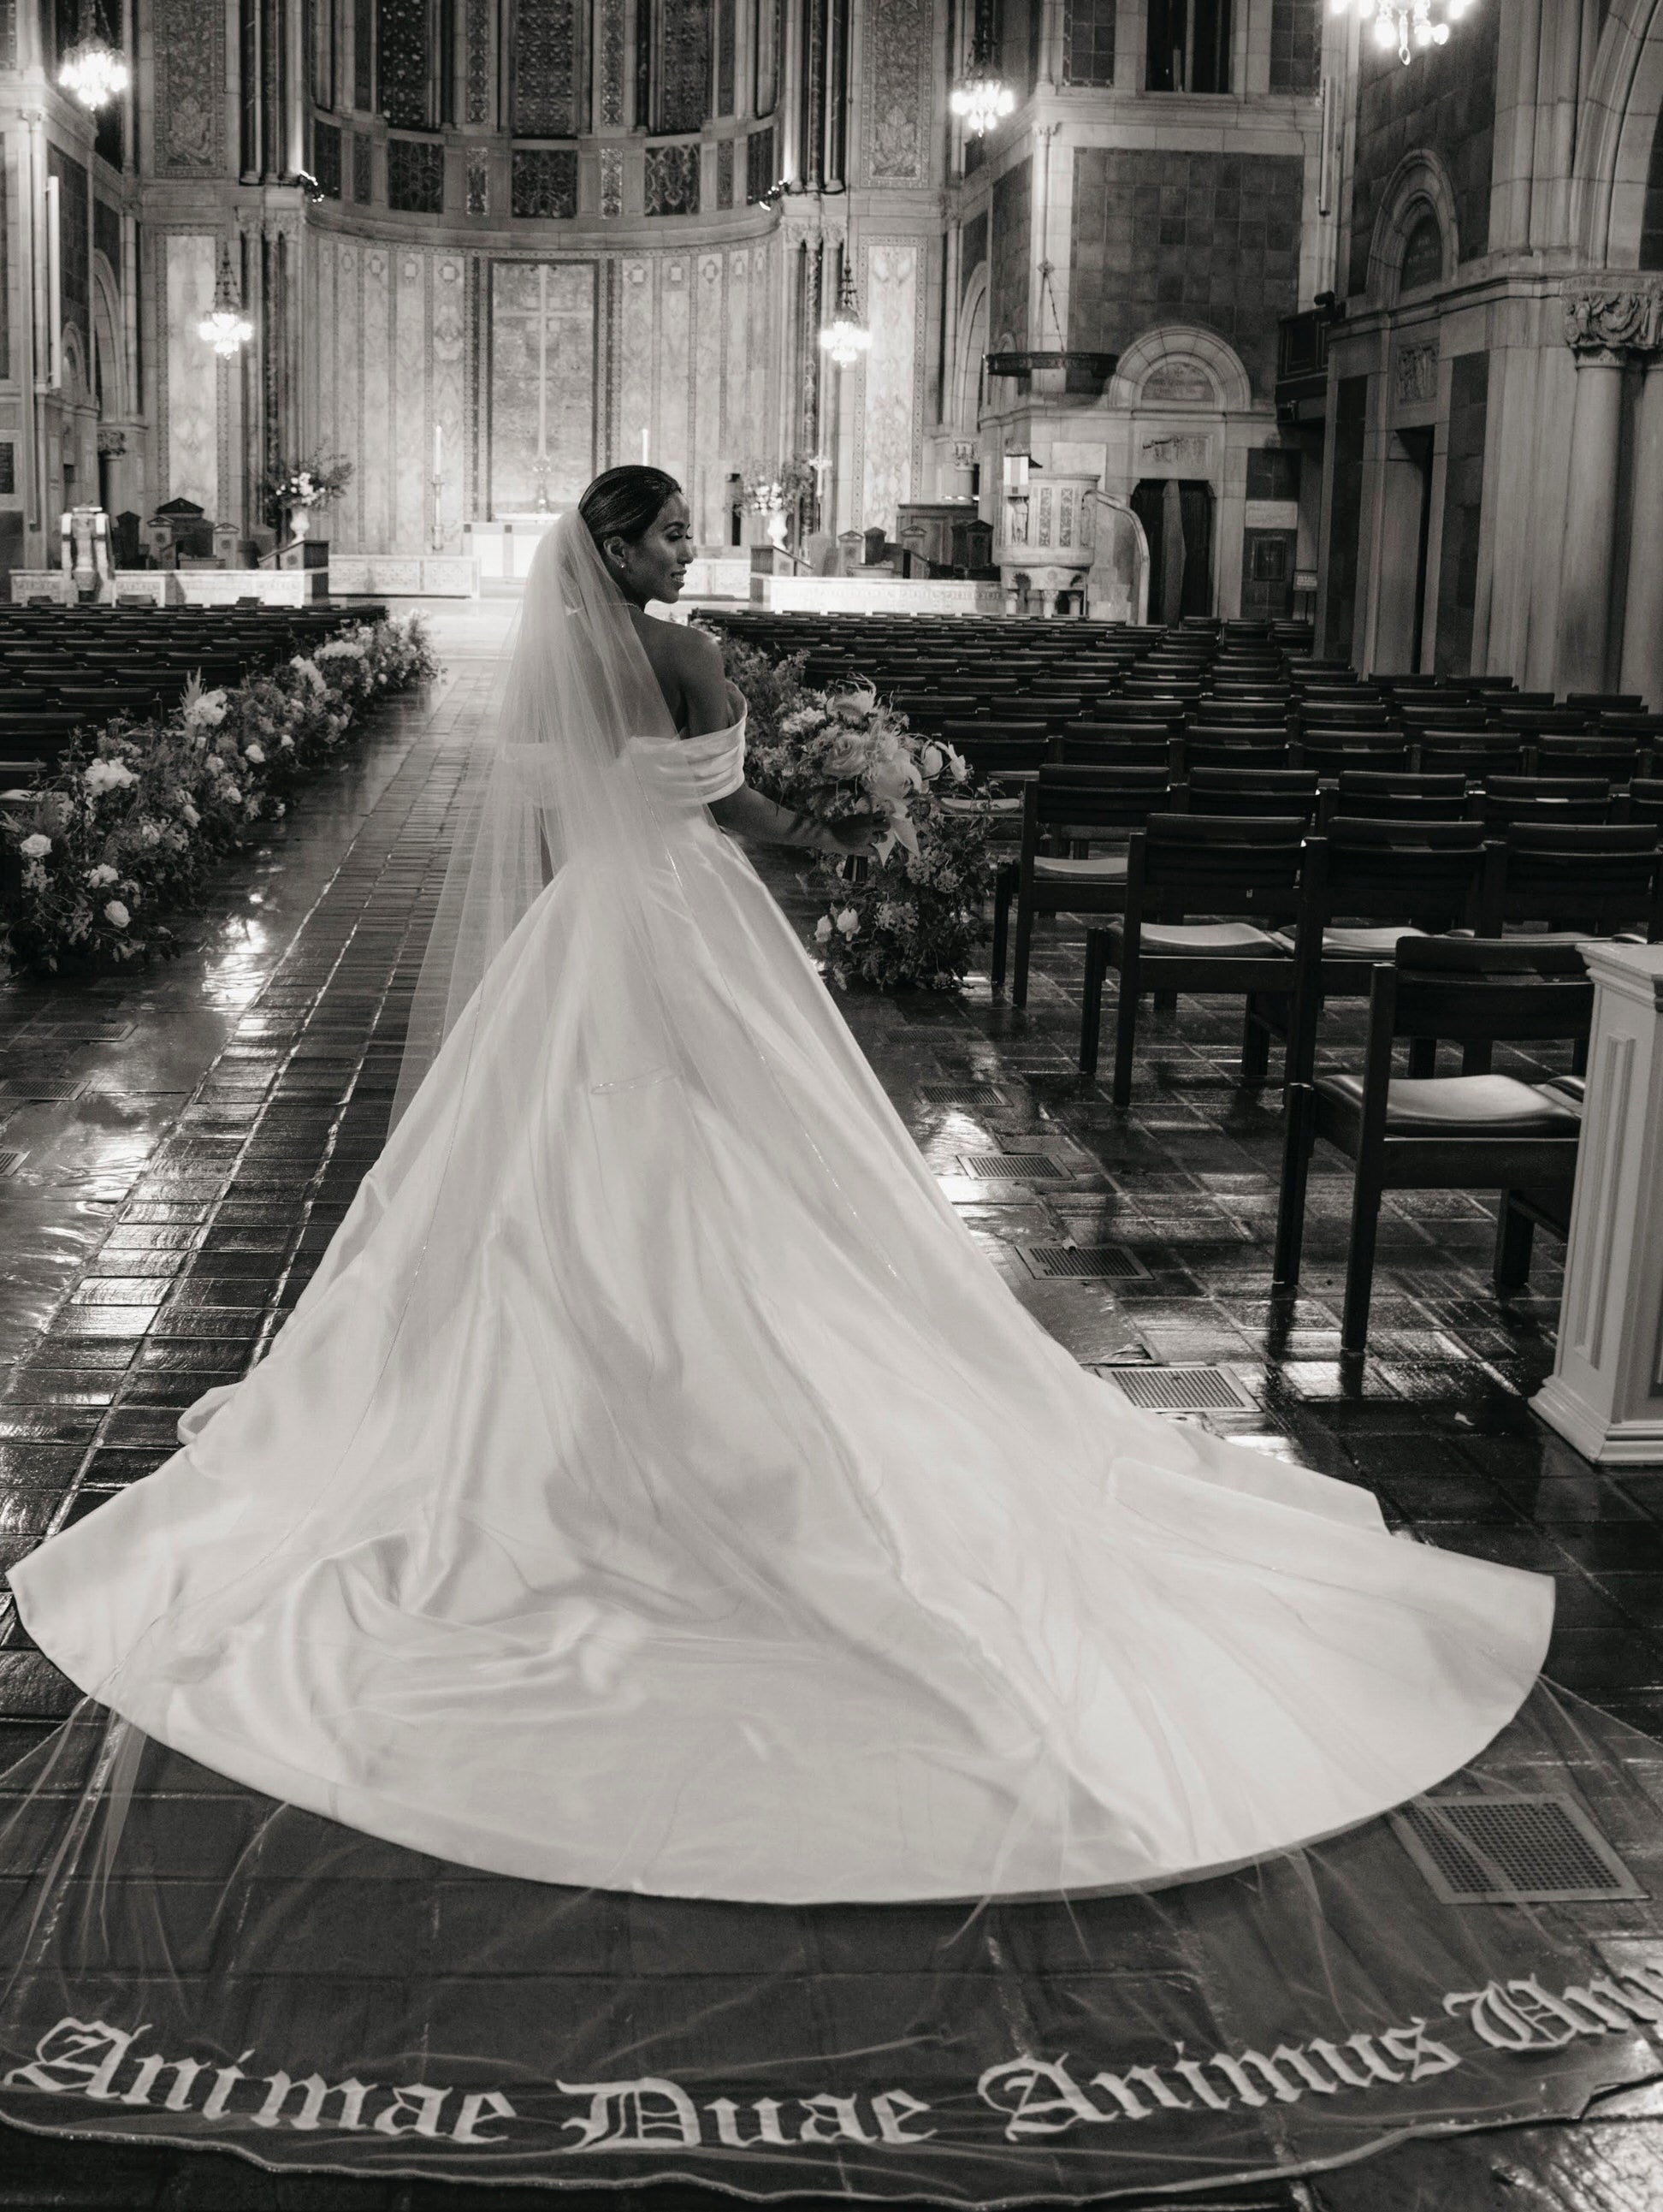 6 Dramatic Veil Styles to Impress Your Wedding Guests - The White Dress